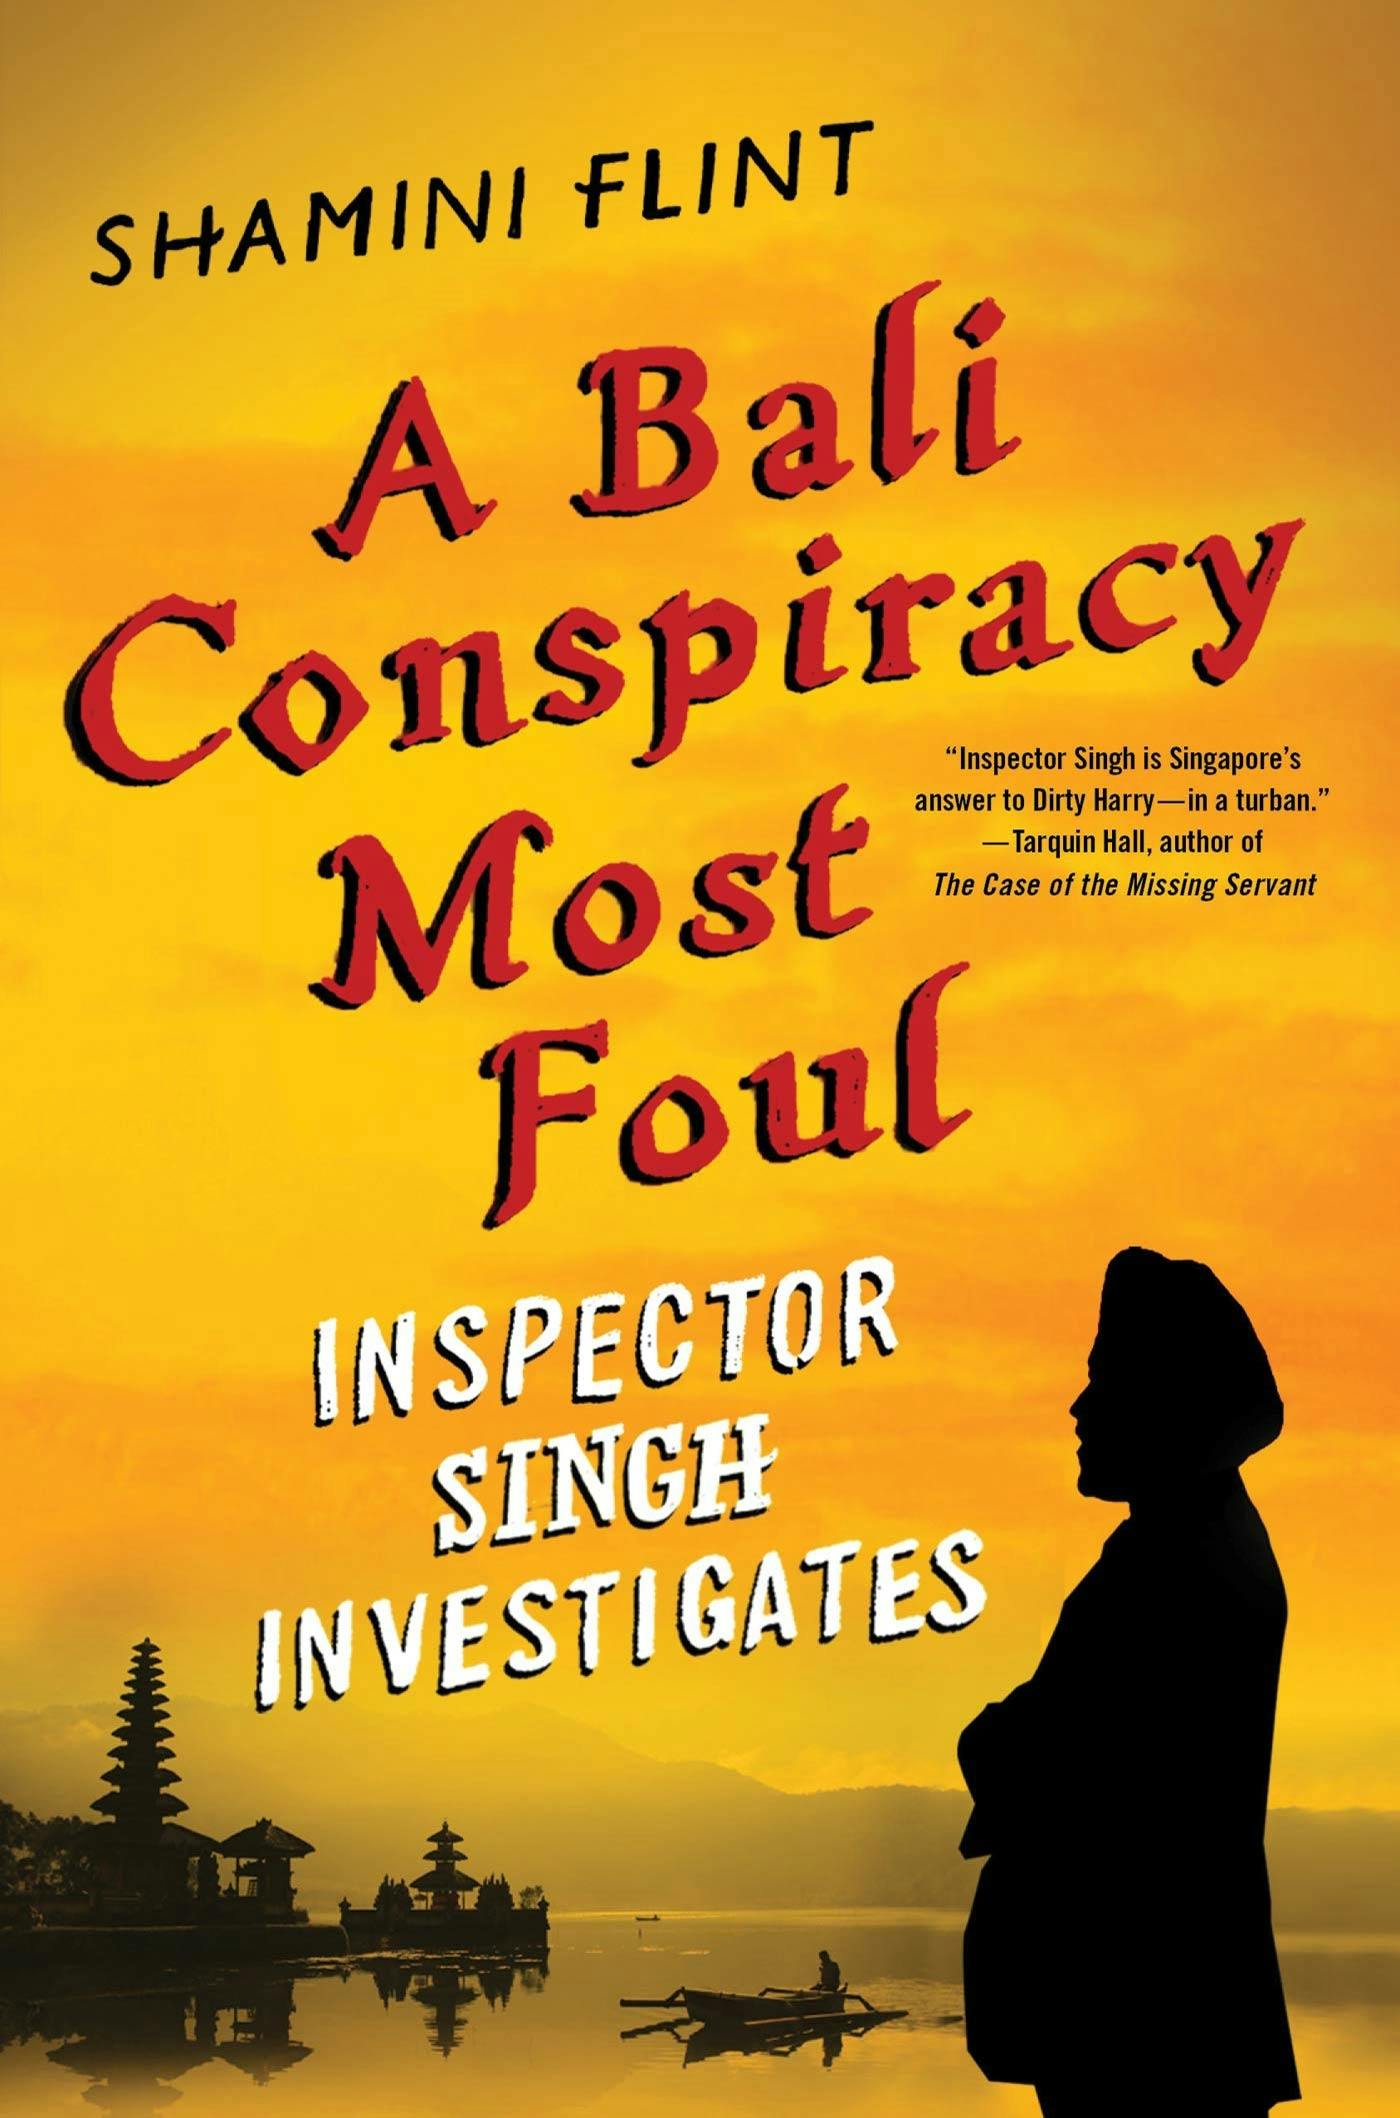 Bali Conspiracy Most Foul: Inspector Singh Investigates